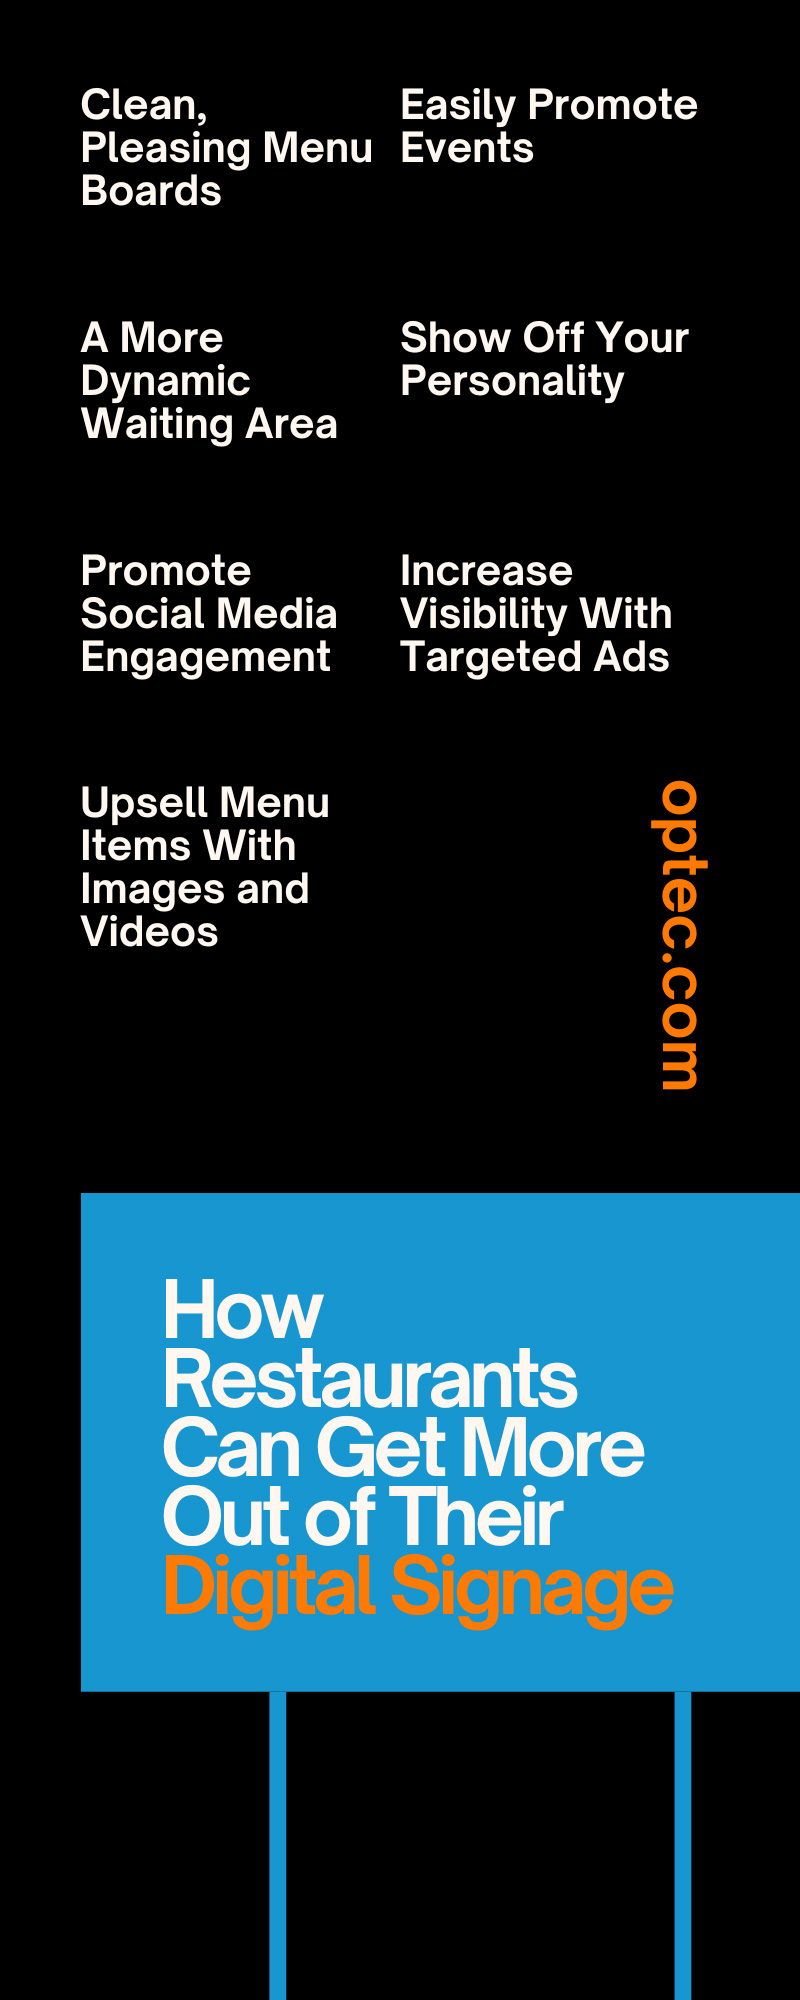 How Restaurants Can Get More Out of Their Digital Signage